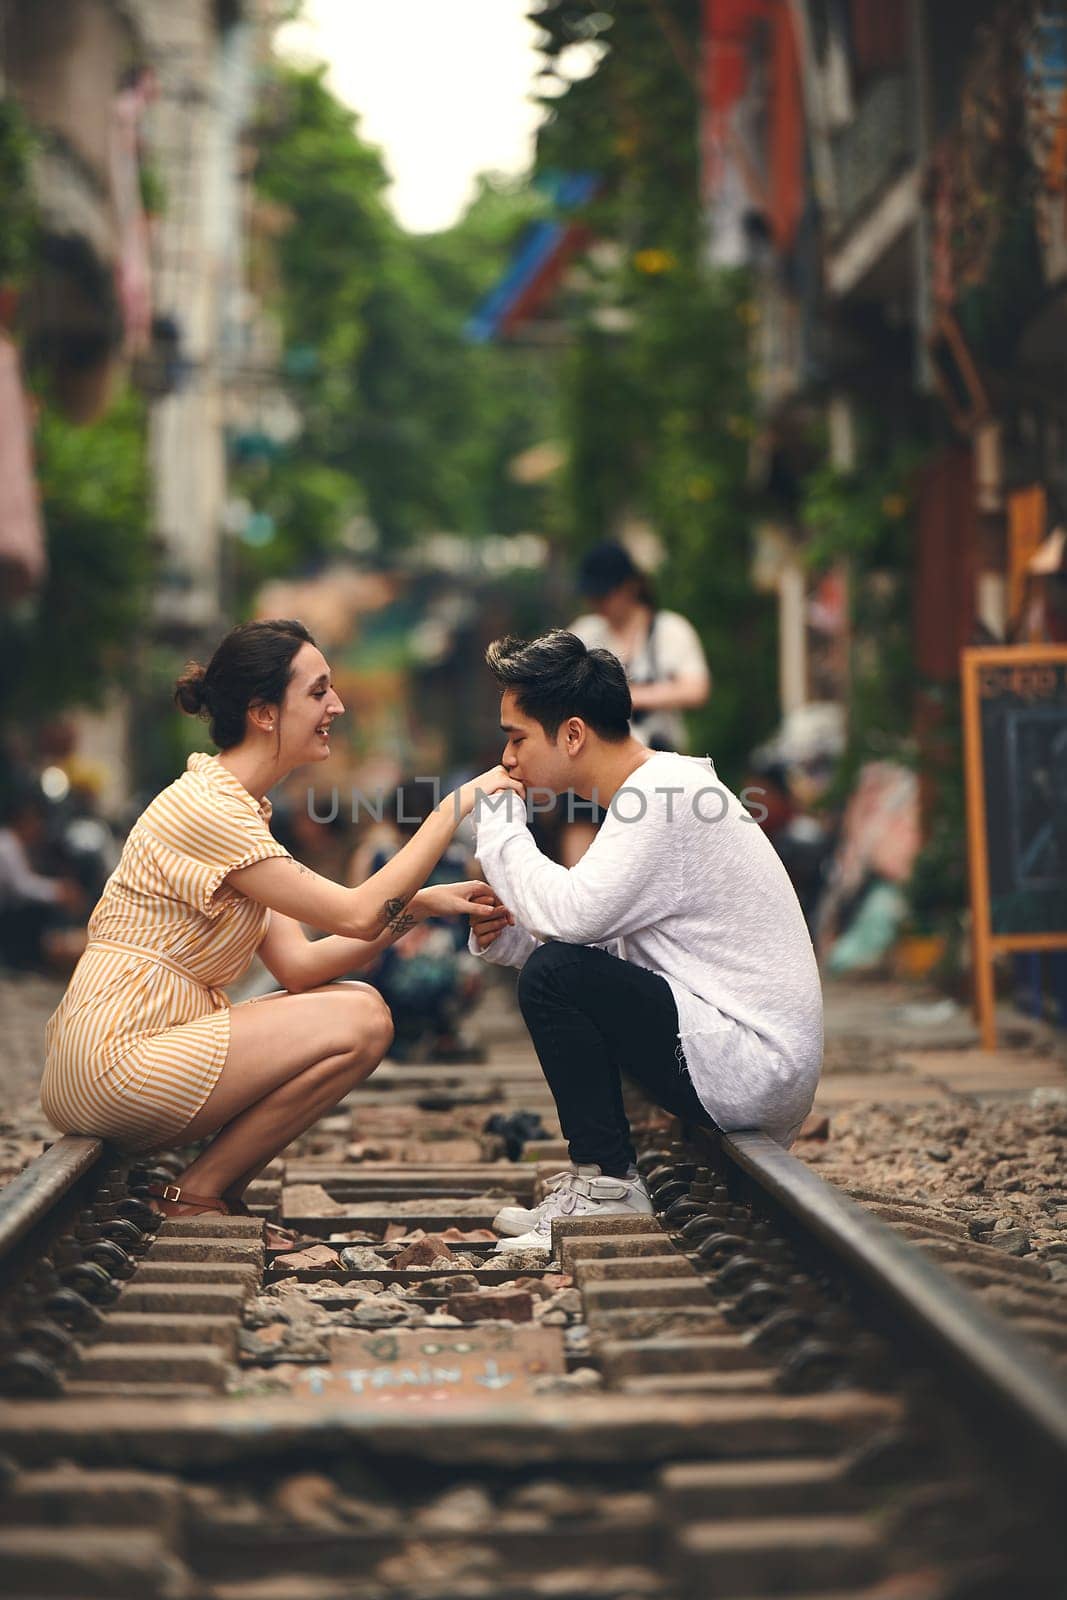 Theyre at romance station now. a young couple sharing a romantic moment on the train tracks in the streets of Vietnam